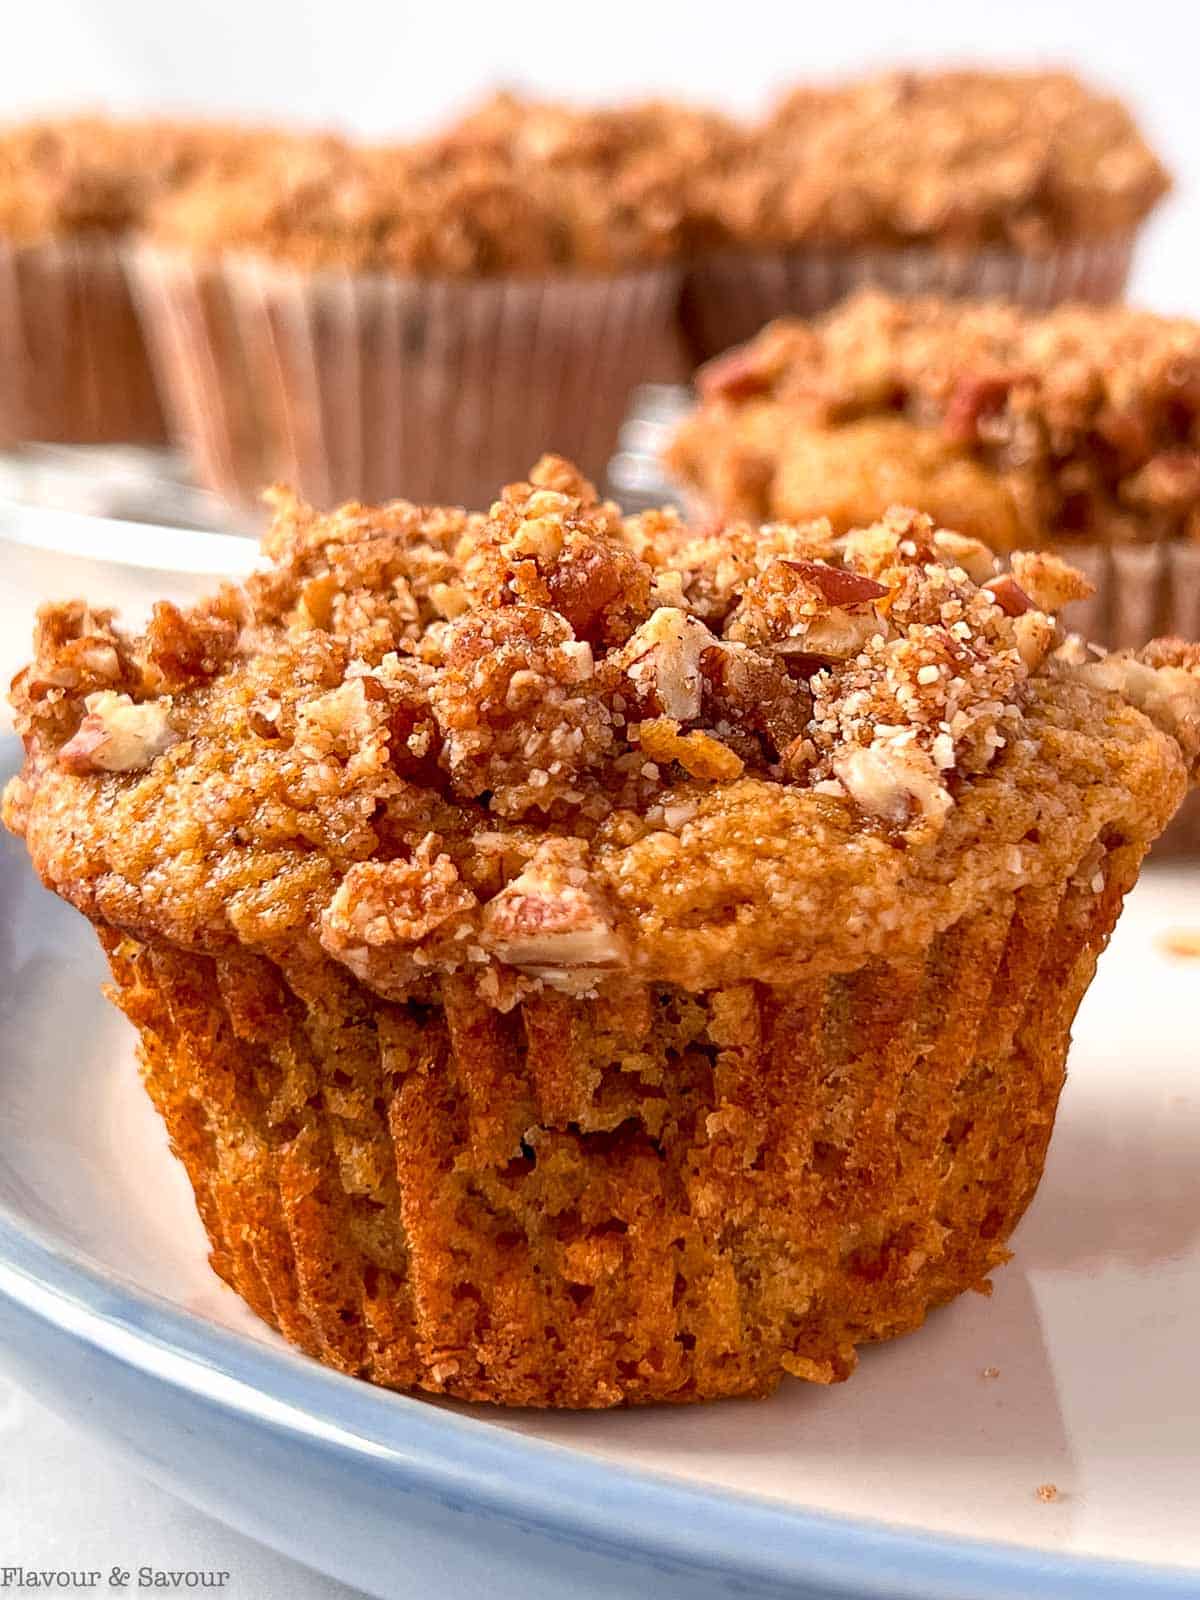 Close up view of a glutlen-free almond flour muffin showing the maple pecan streusel topping.